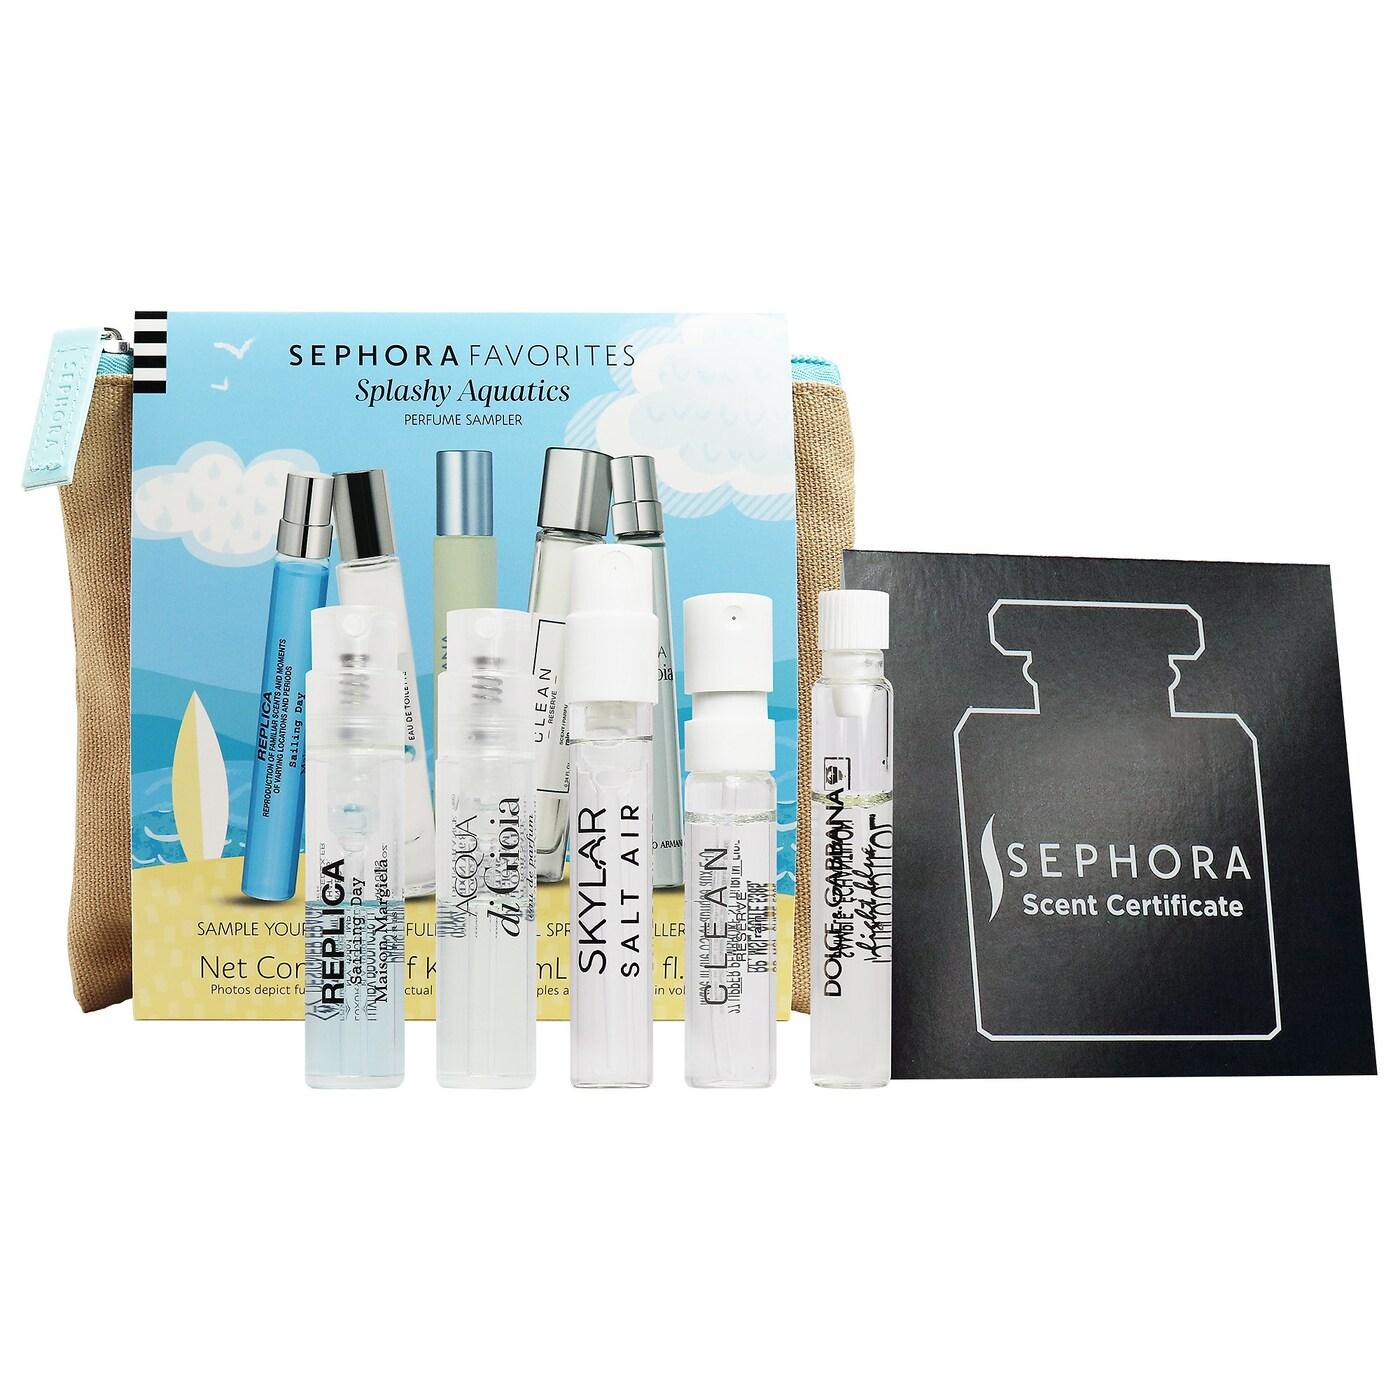 Read more about the article SEPHORA Favorites Bestselling Aquatic Perfume Sampler Set – On Sale Now